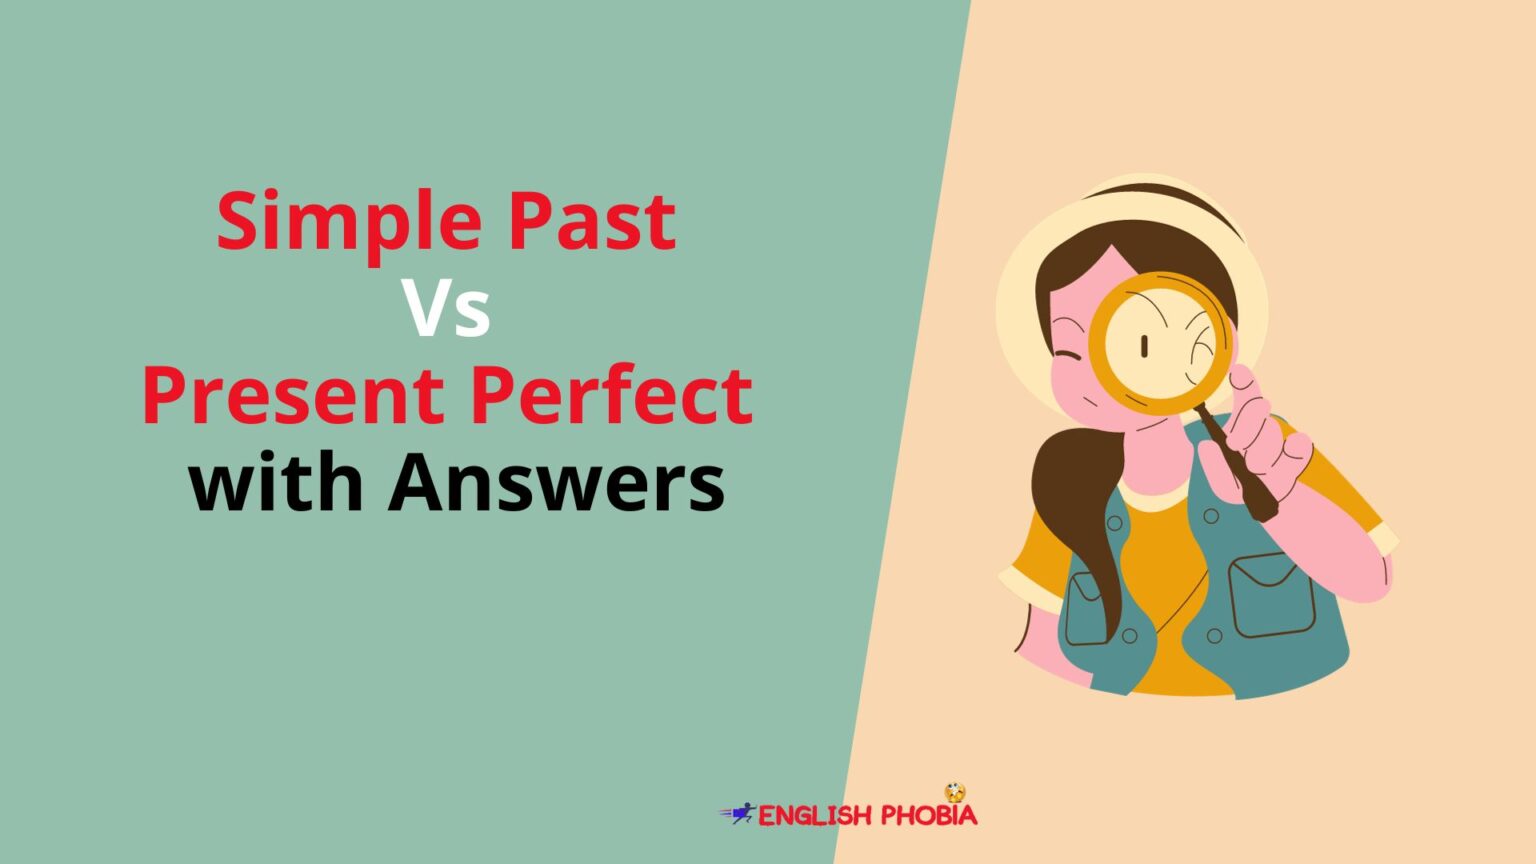 Simple Past Vs Present Perfect With Answers